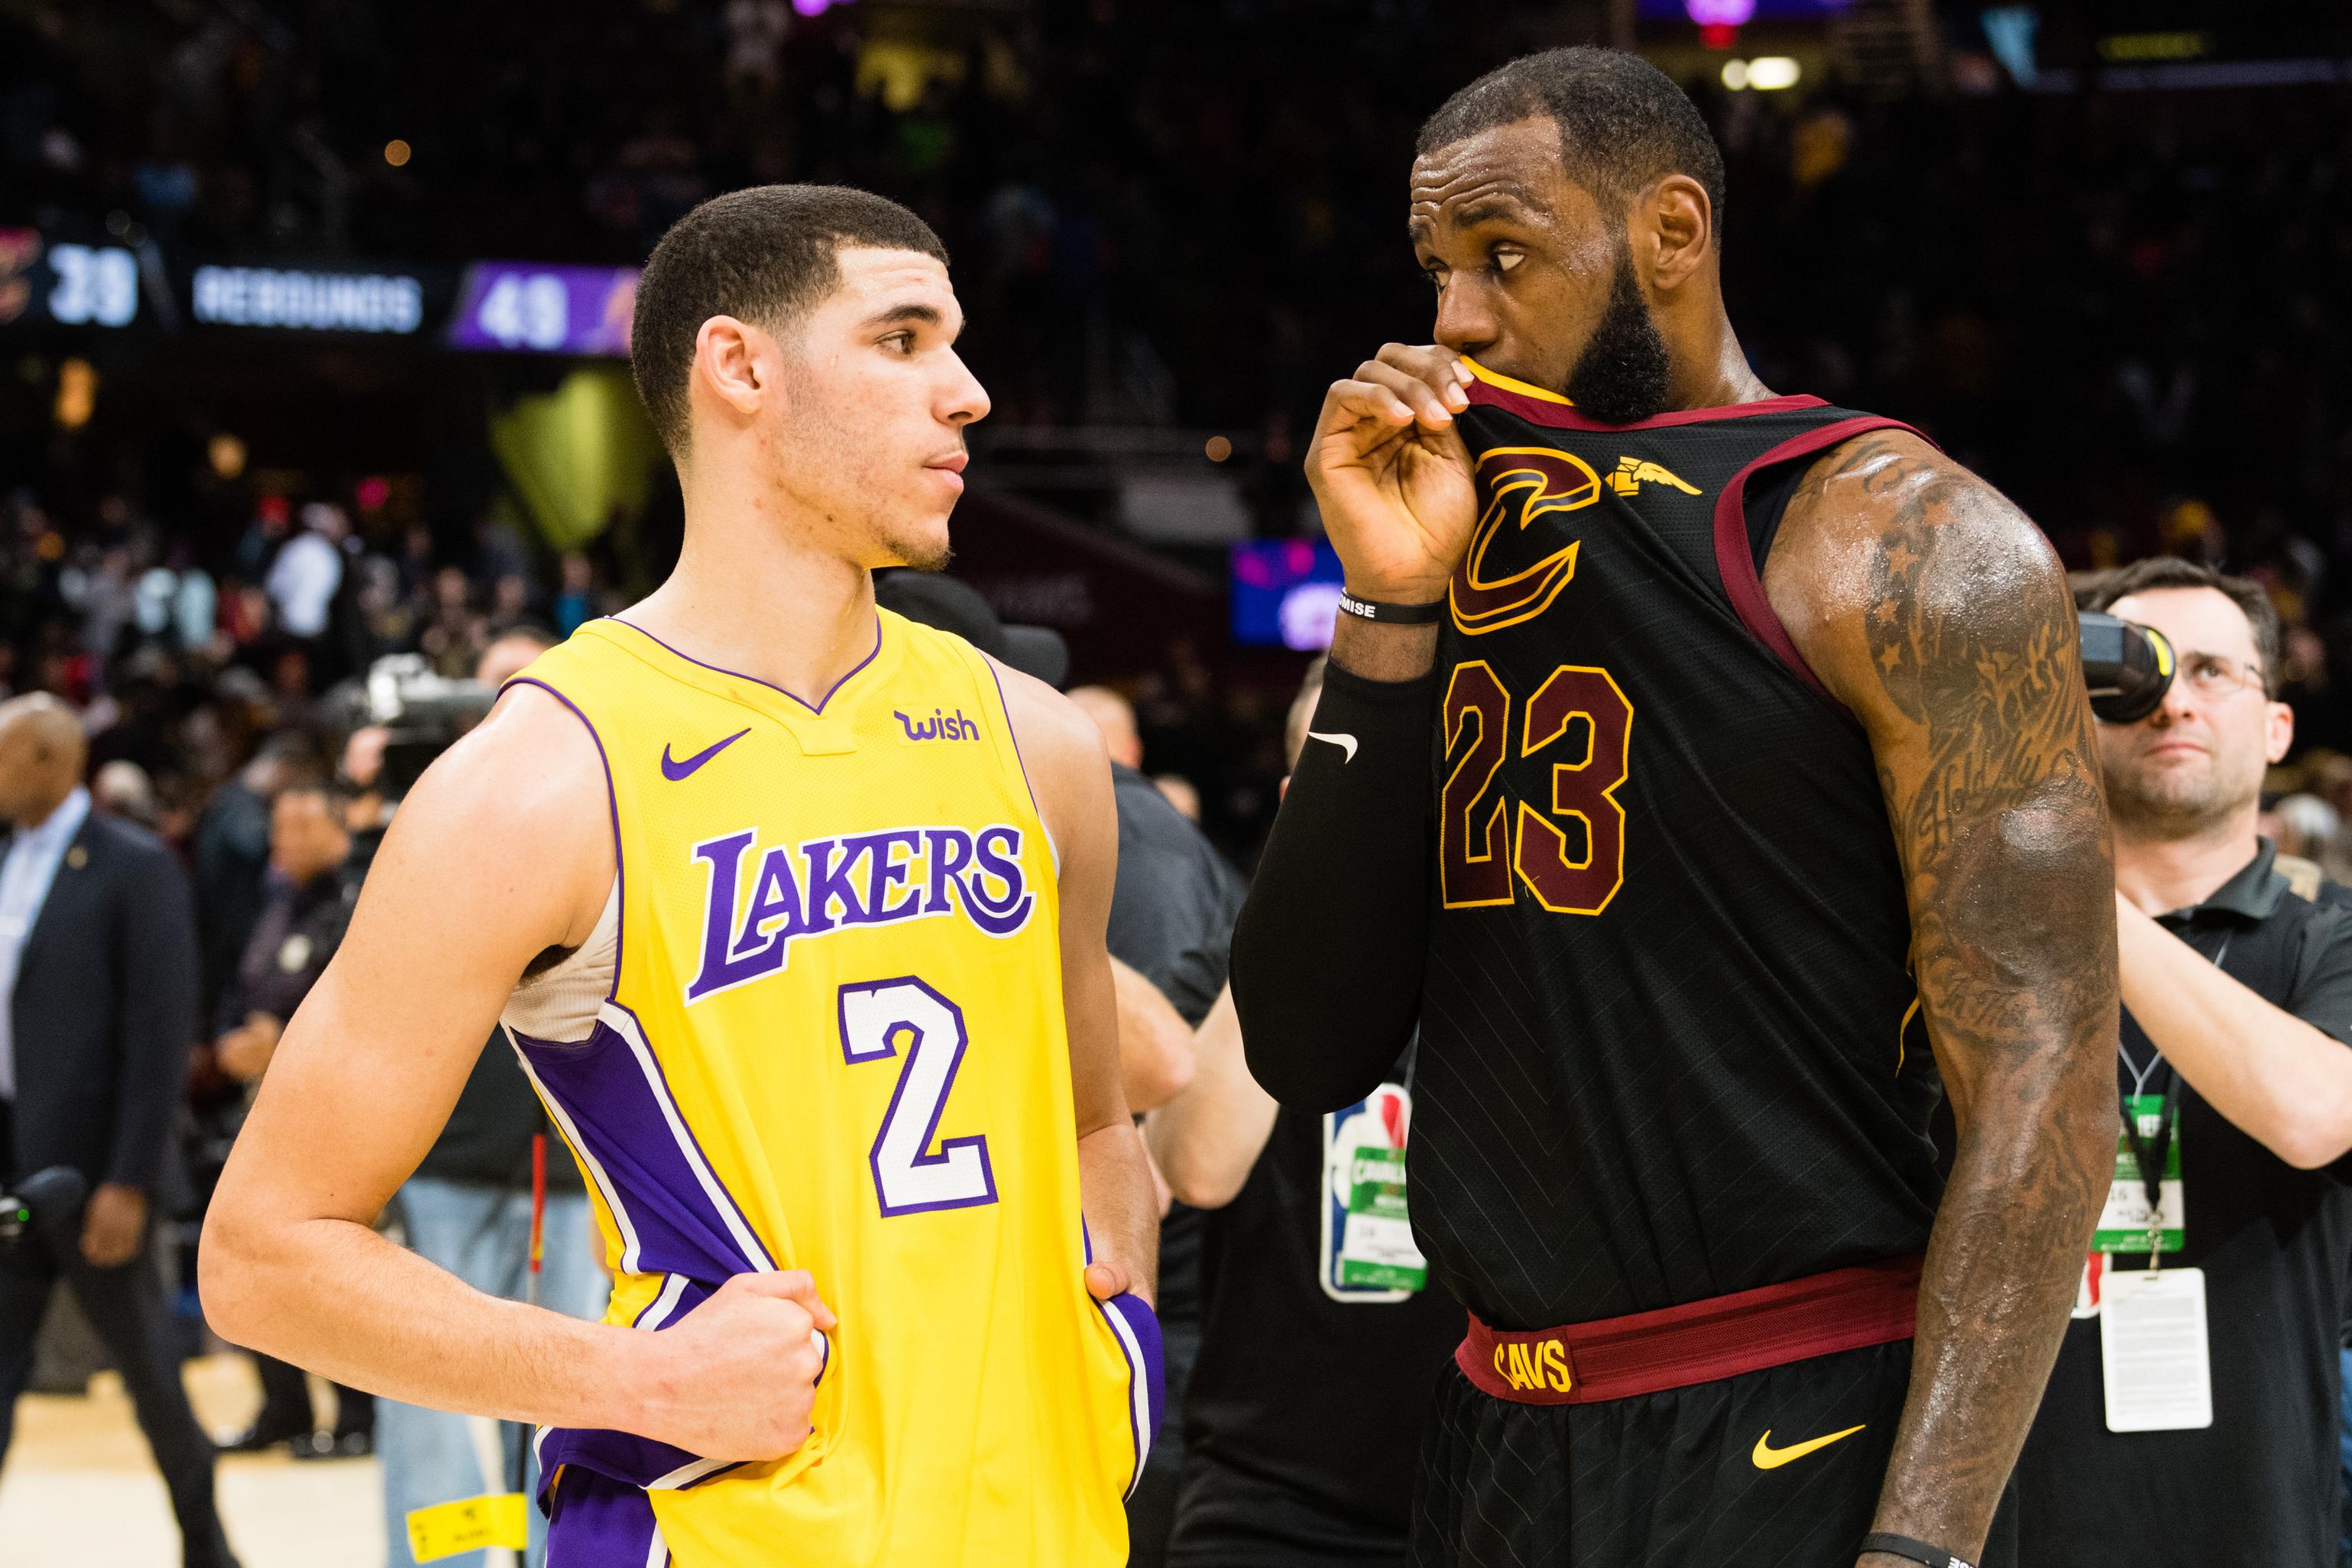 LeBron James Puts On a Lakers Uniform, and a Stoic Mask - The New